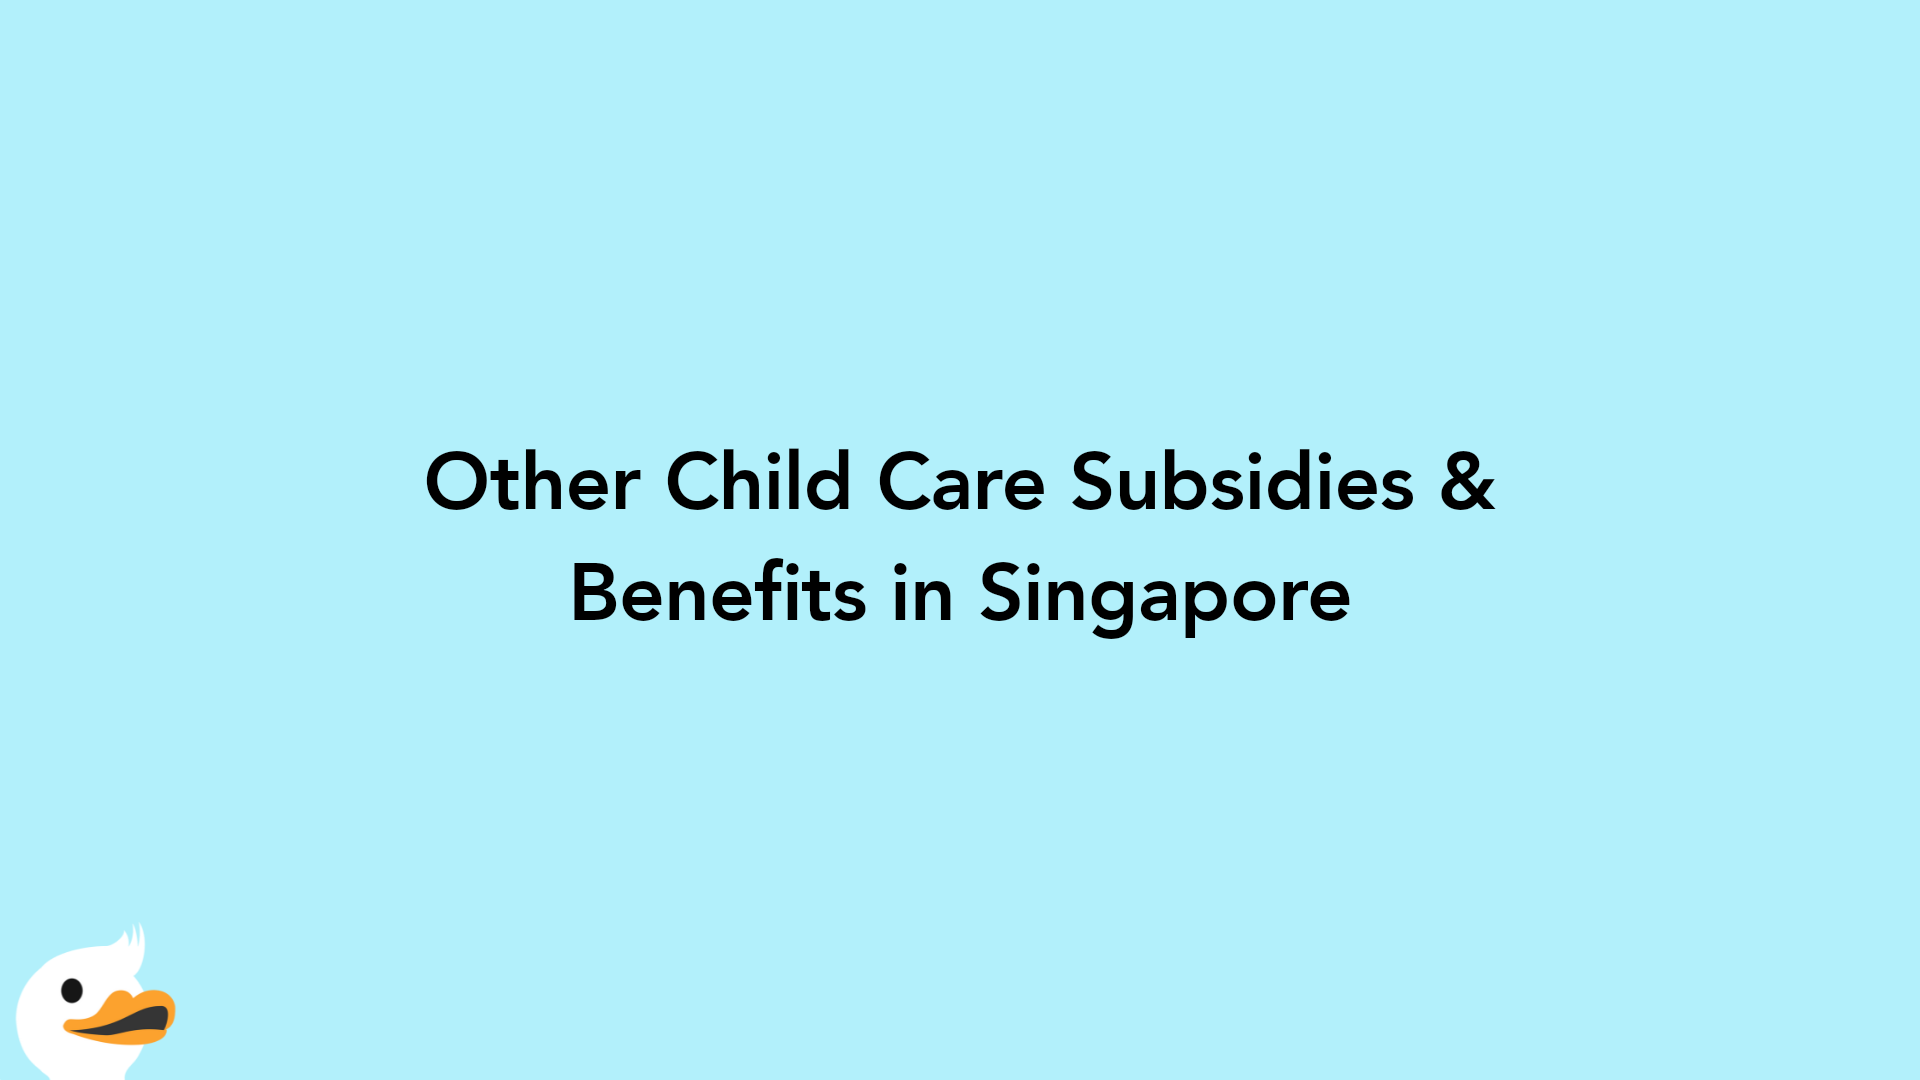 Other Child Care Subsidies & Benefits in Singapore